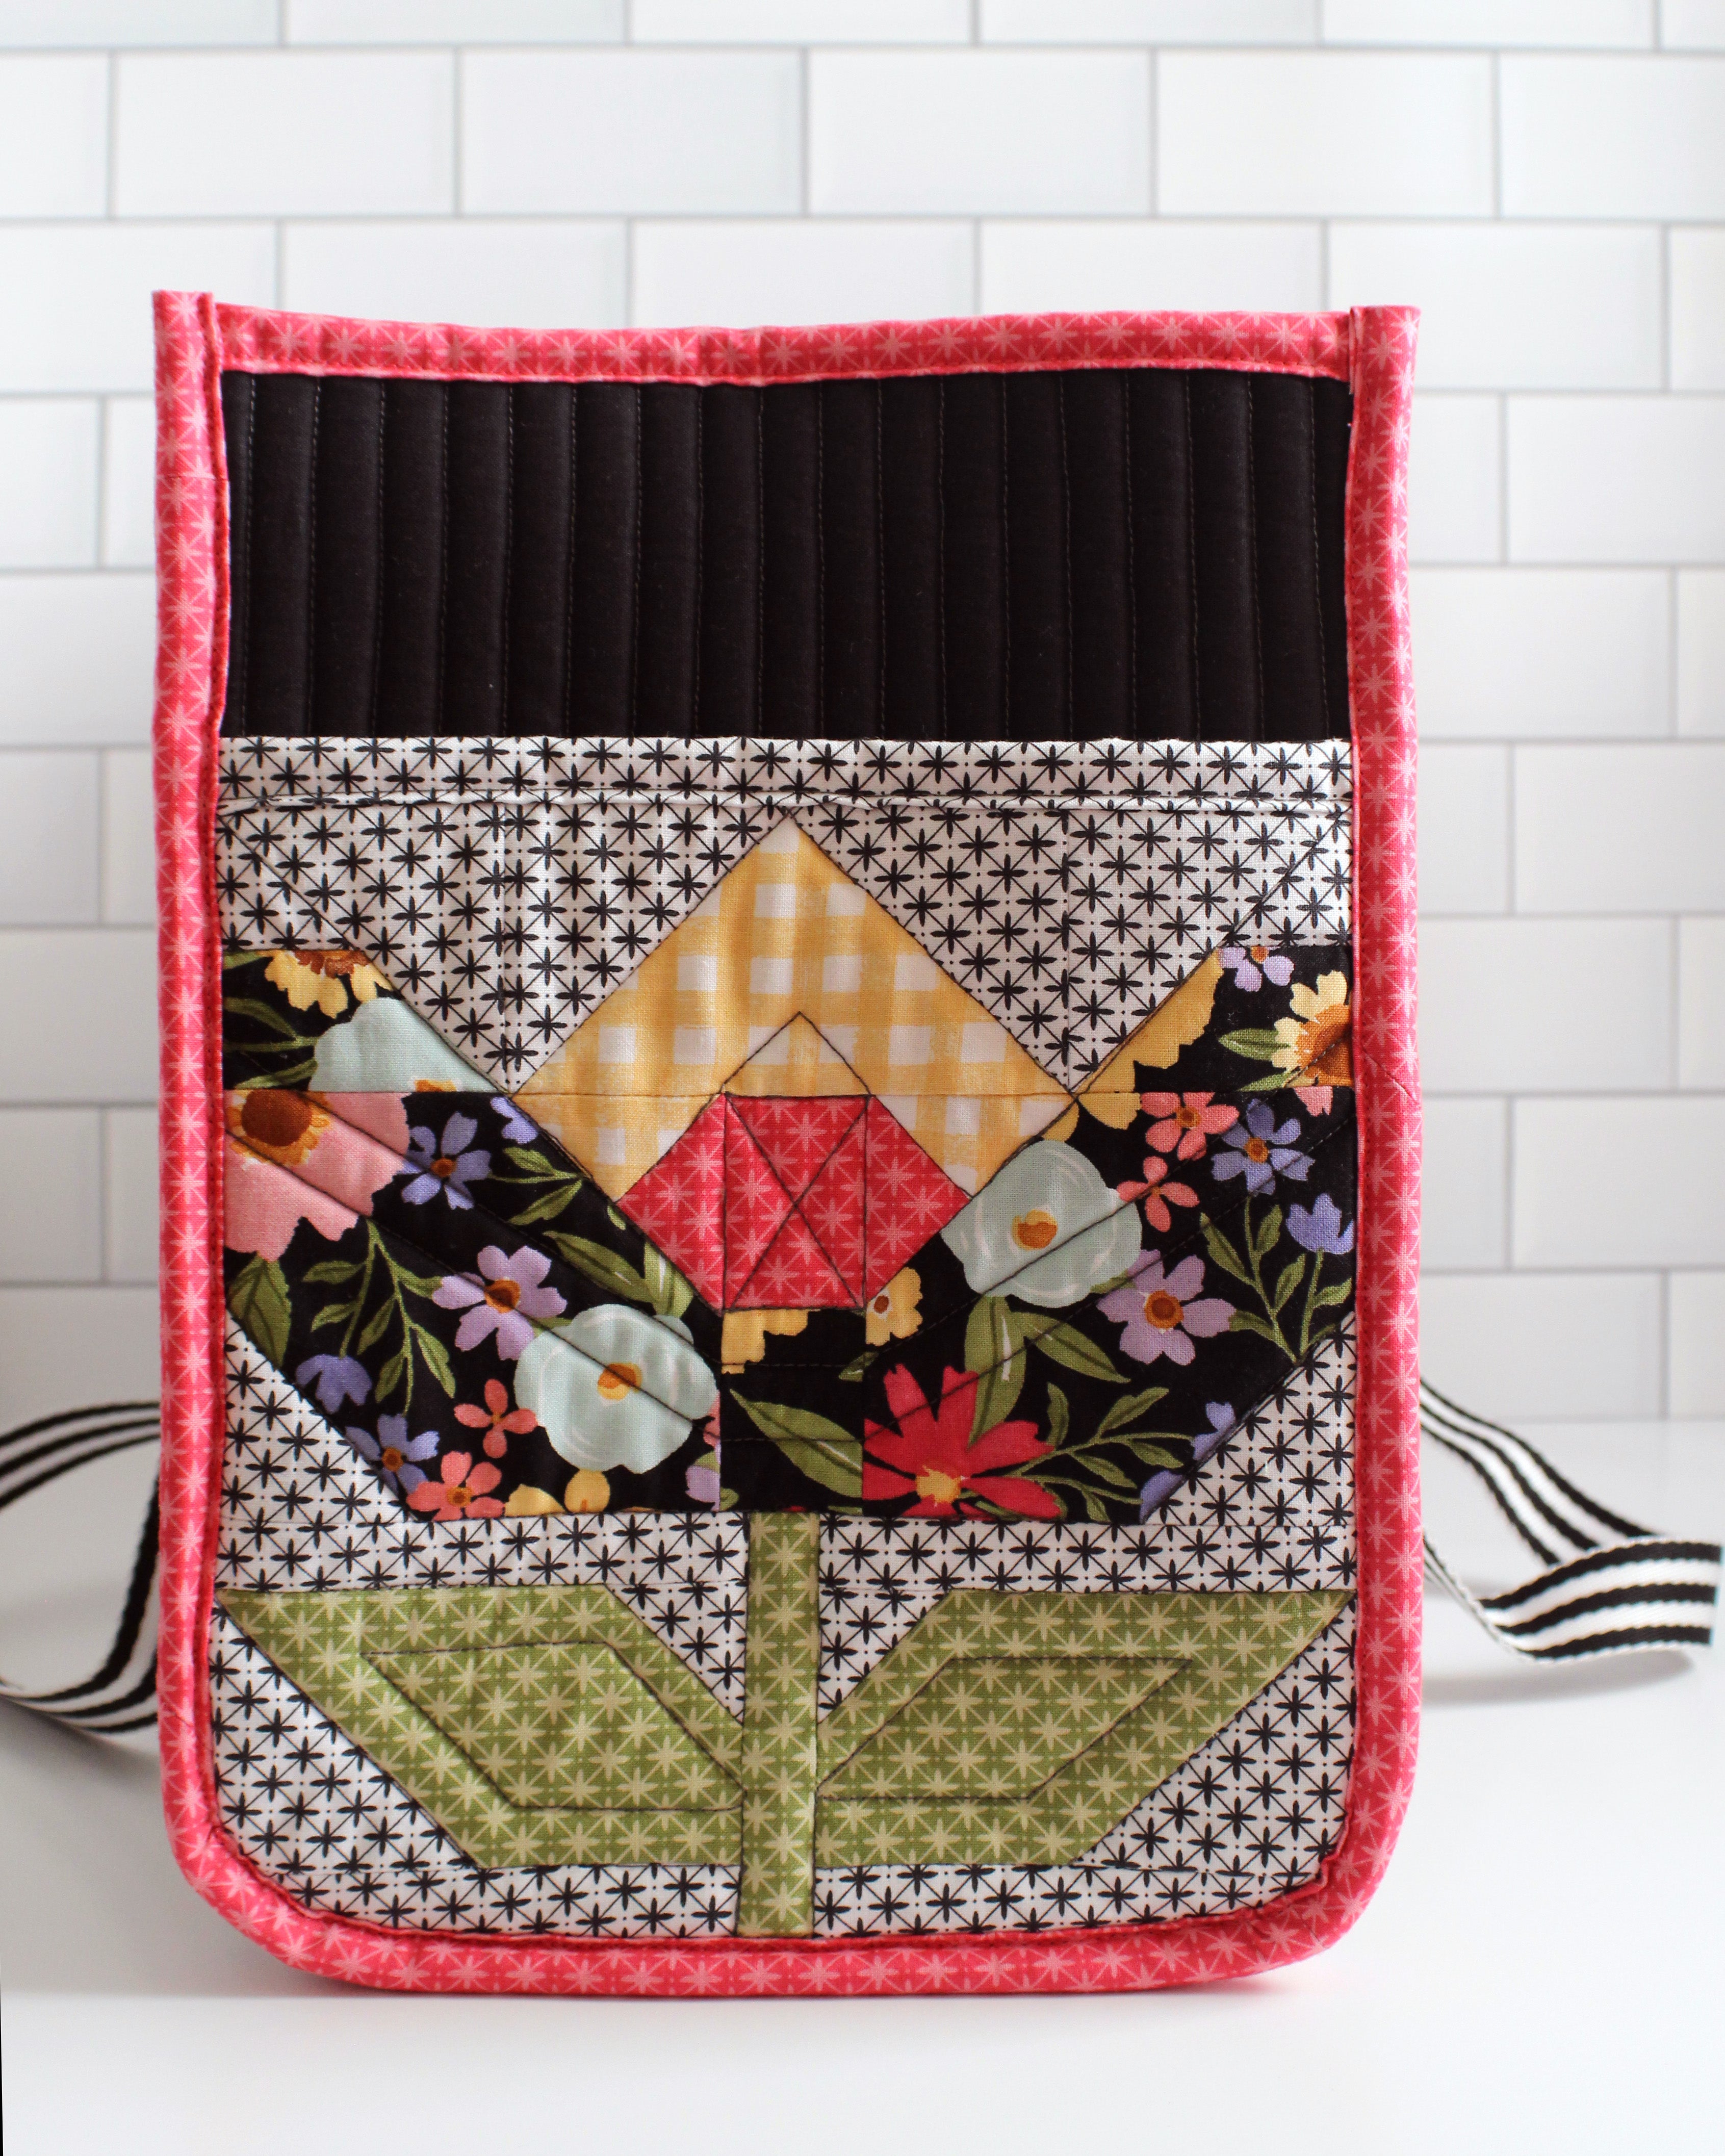 Flora Bud Quilt Block on pockets of the All The Things Tote by Knot and Thread Designs